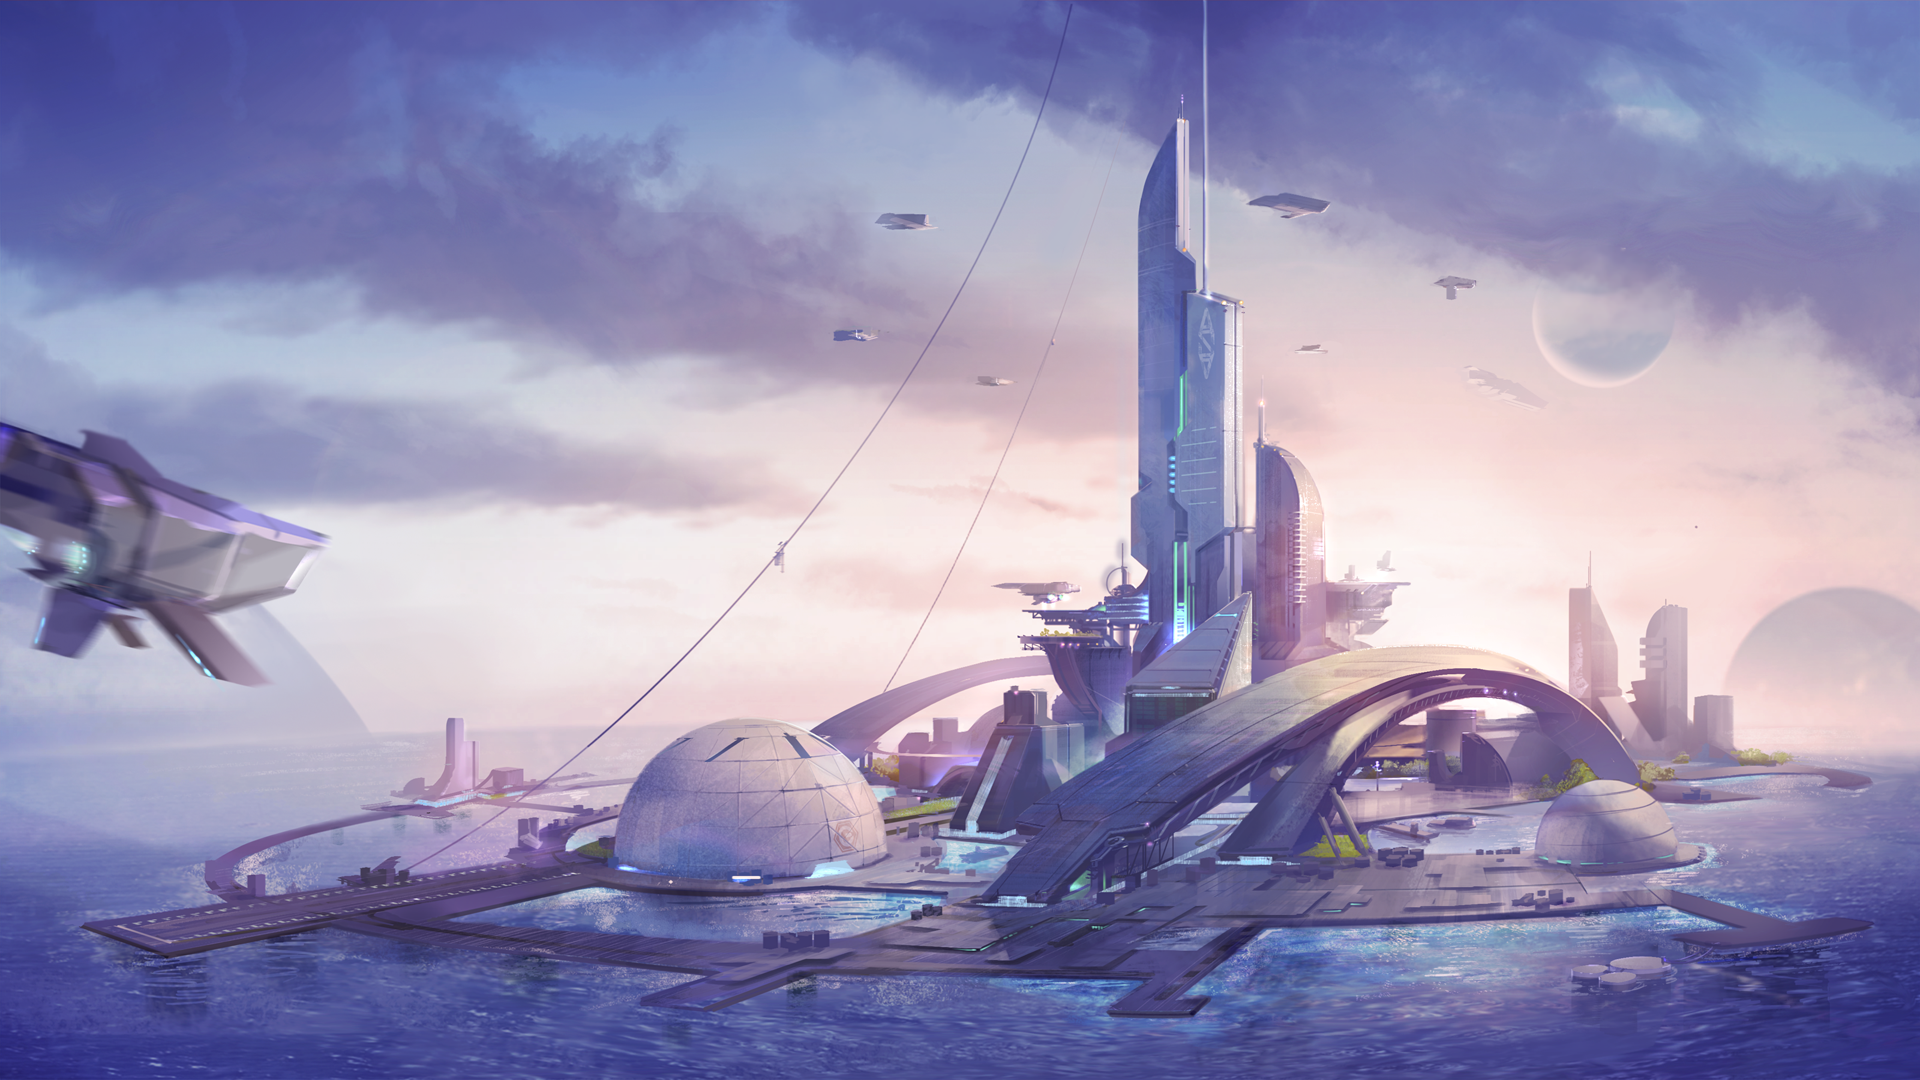 Civilization: Beyond Earth Wallpapers